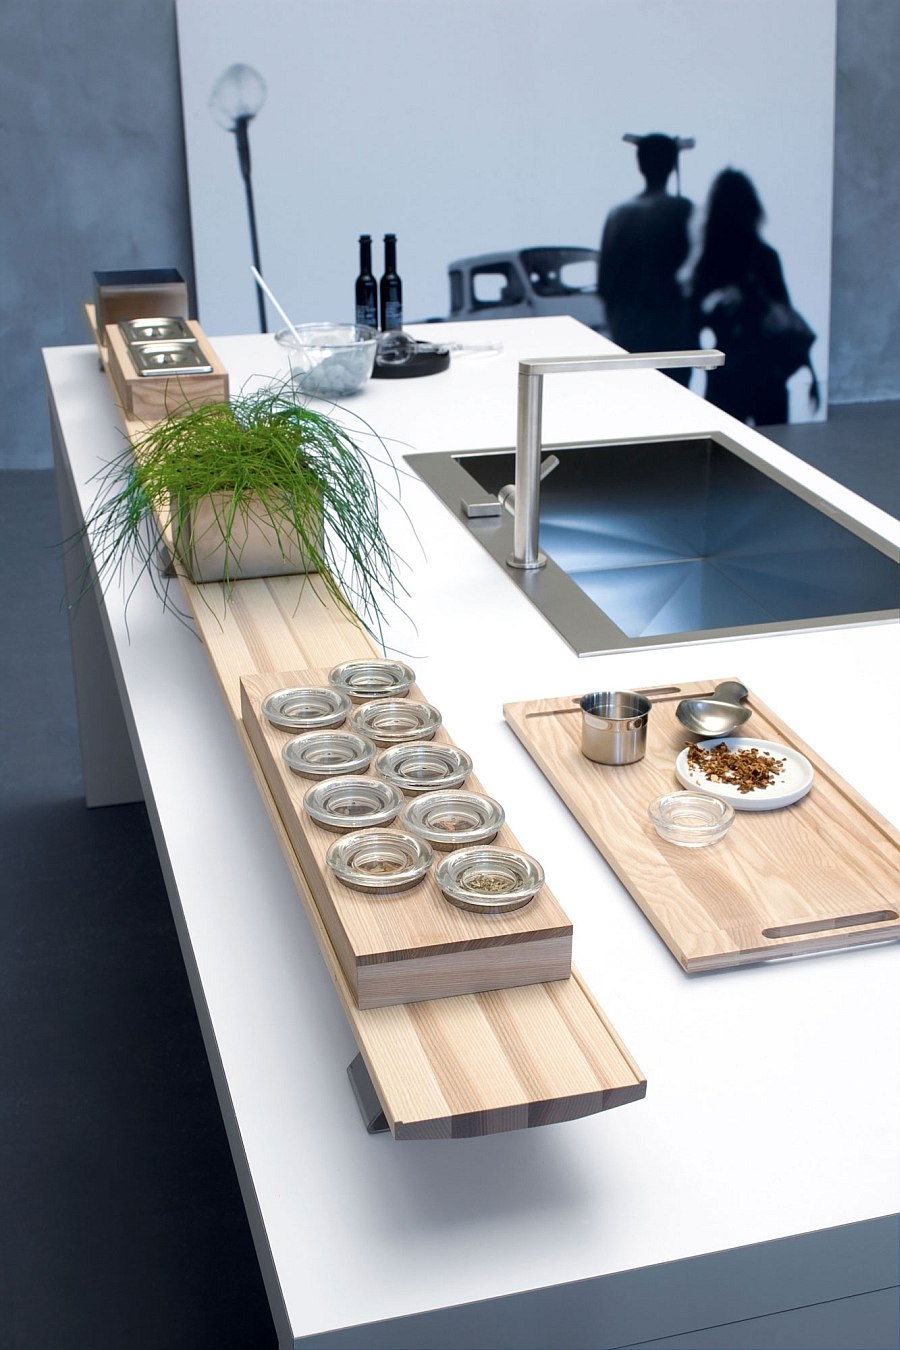 Dynamic accessories make cooking a delight inside Code kitchen